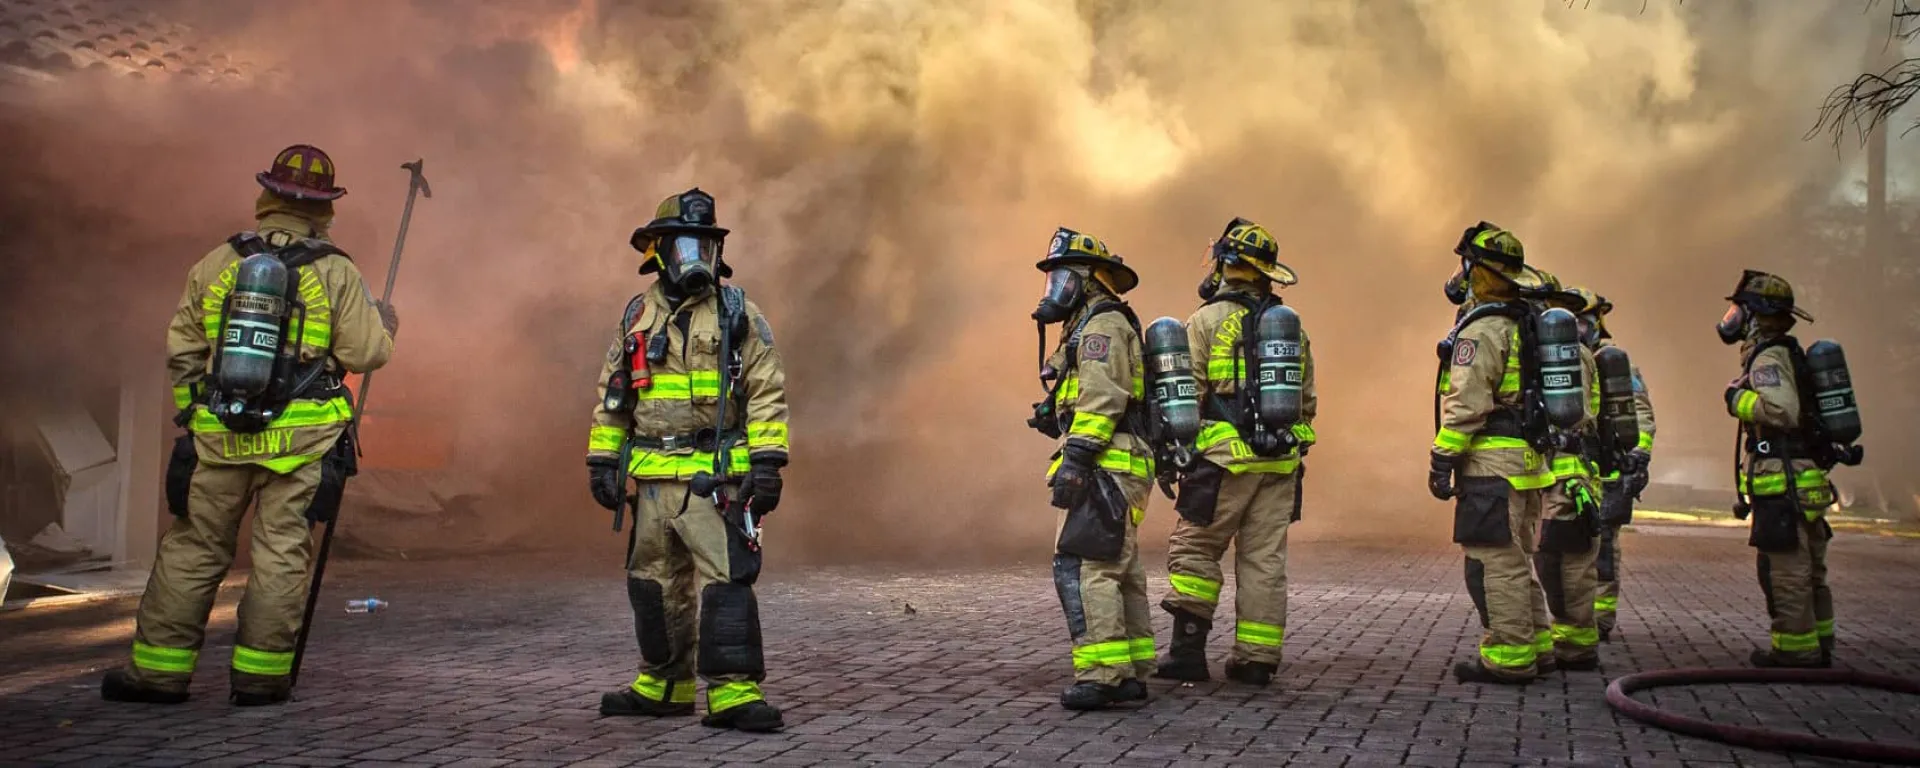 A group of firefighters with smoke behind them